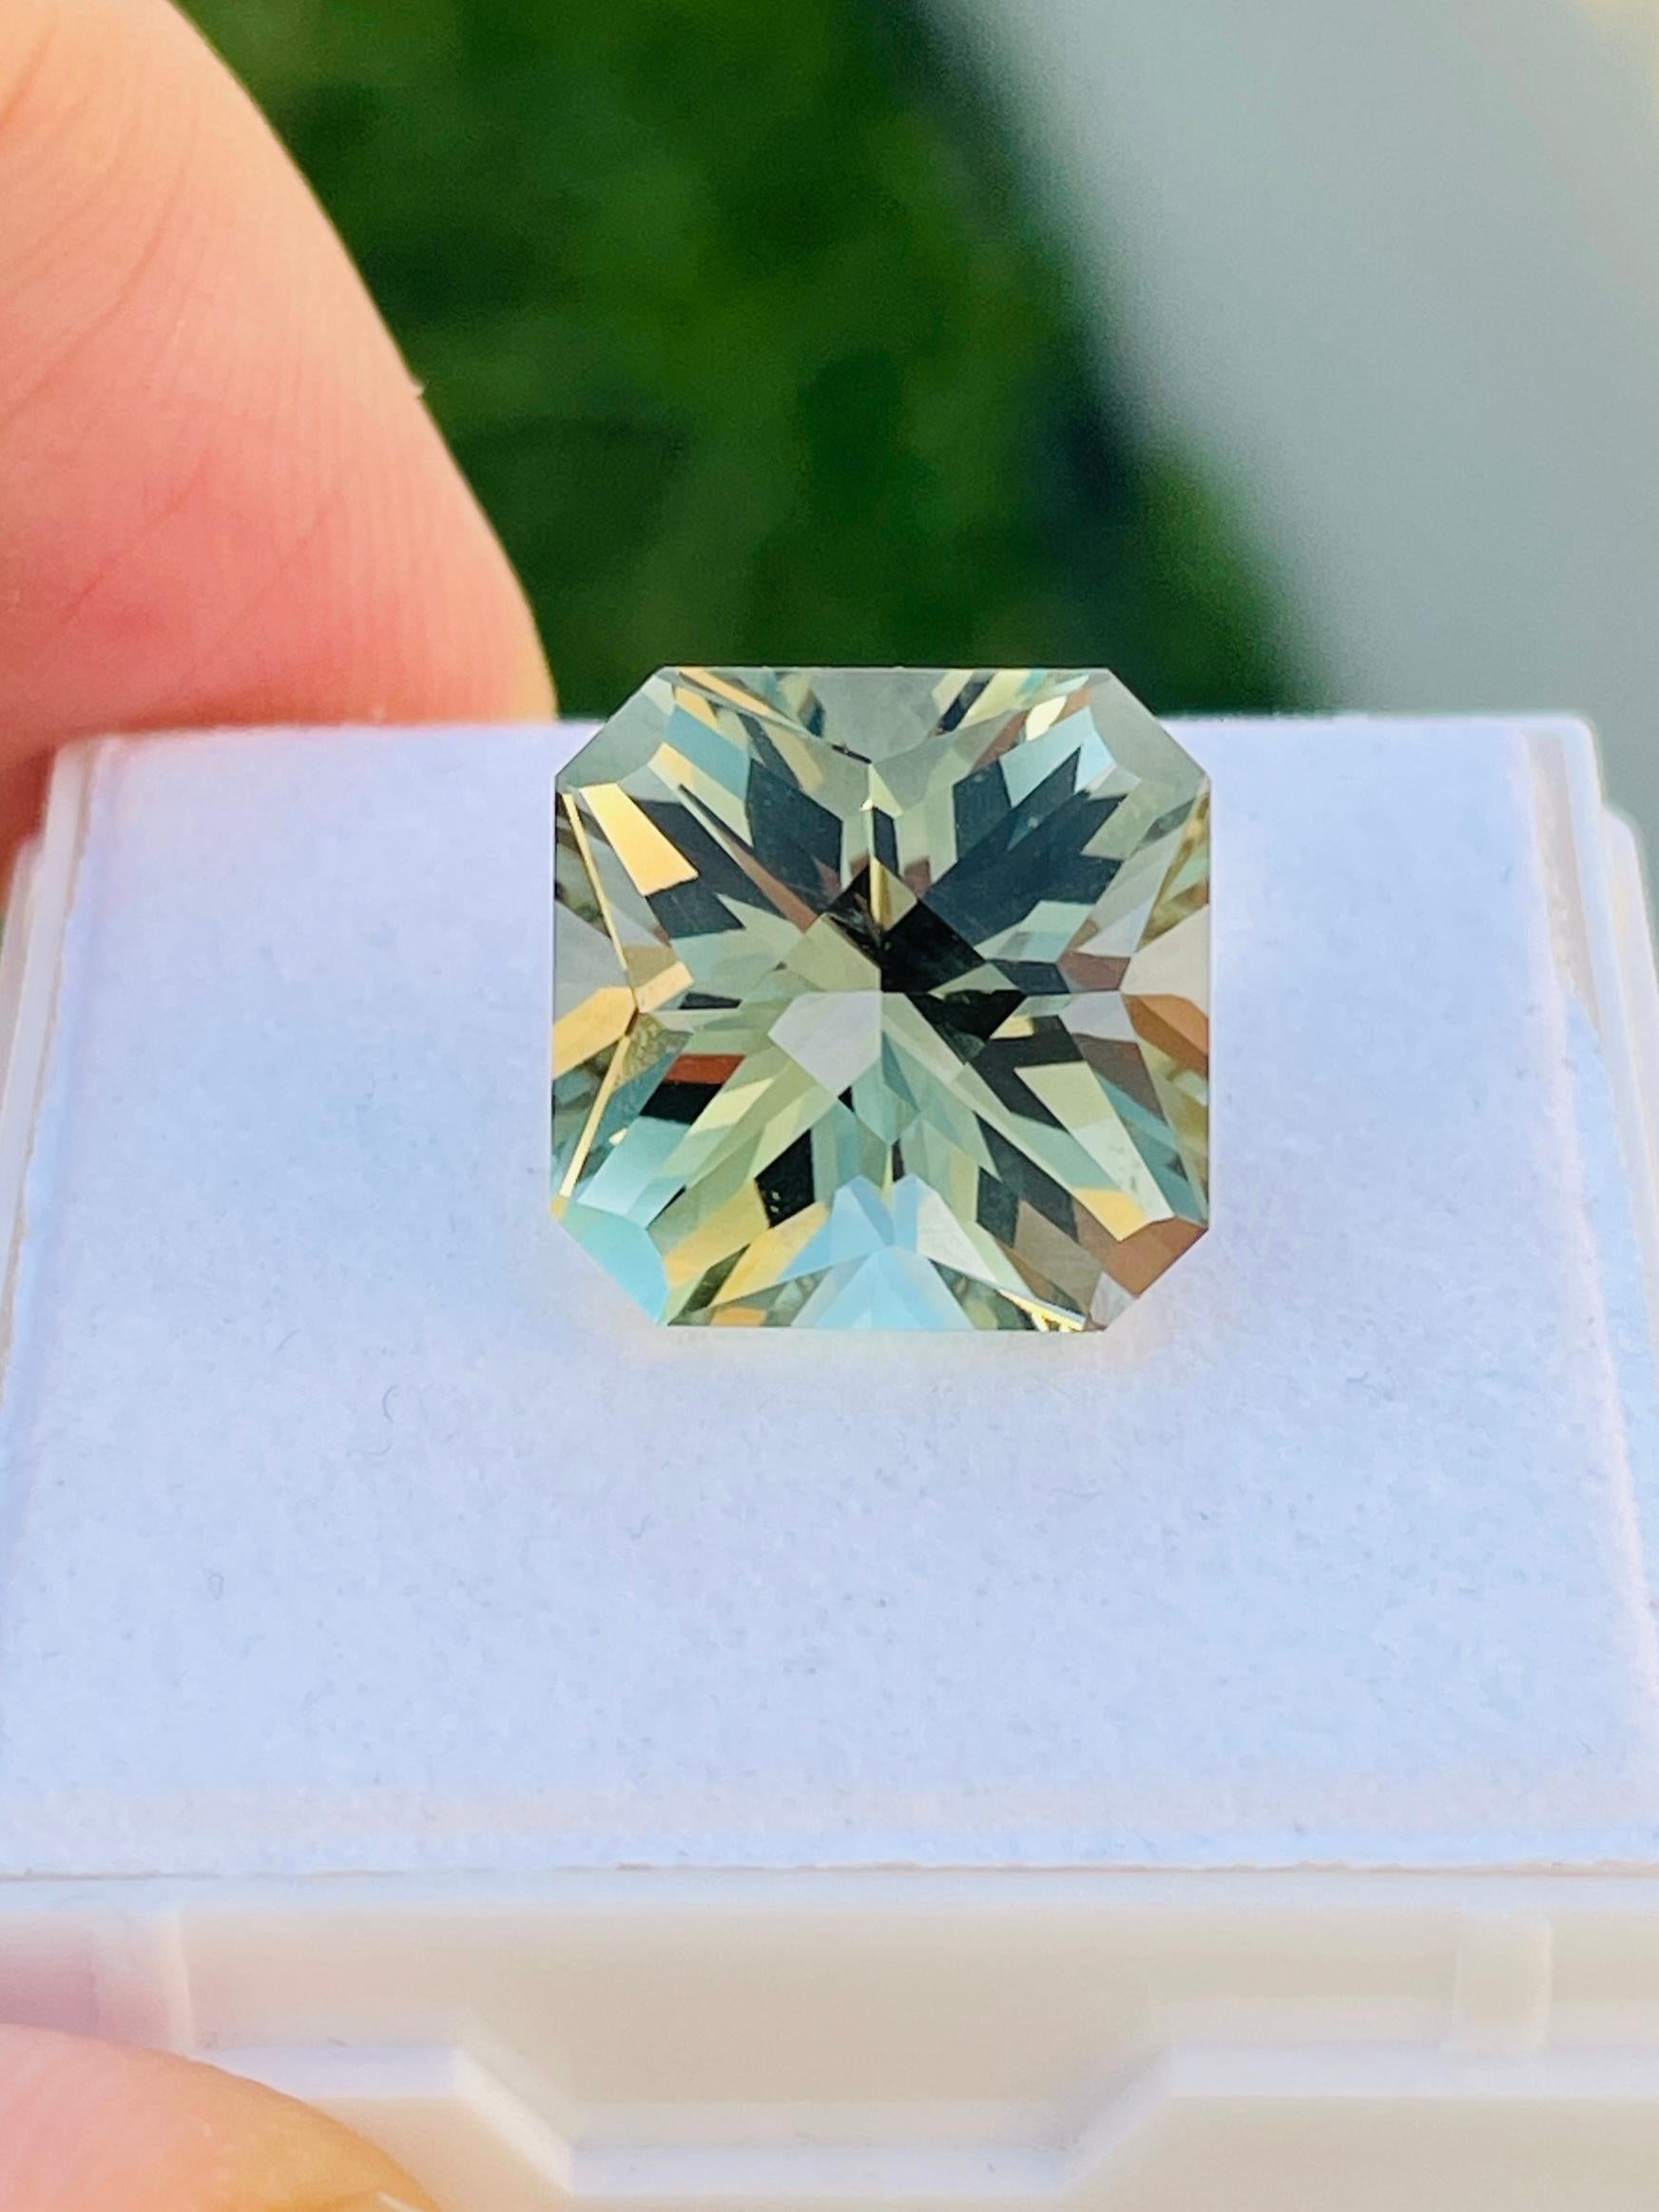 Name: green quartz or green amethyst 
weight: 9.48
size: 13mm
origin: Brazil 
color: green
clarity: loop clean 100%
Cut: WB GEM signature cut 

Precision cut and include design that only few professional master people can cut at world , this piece